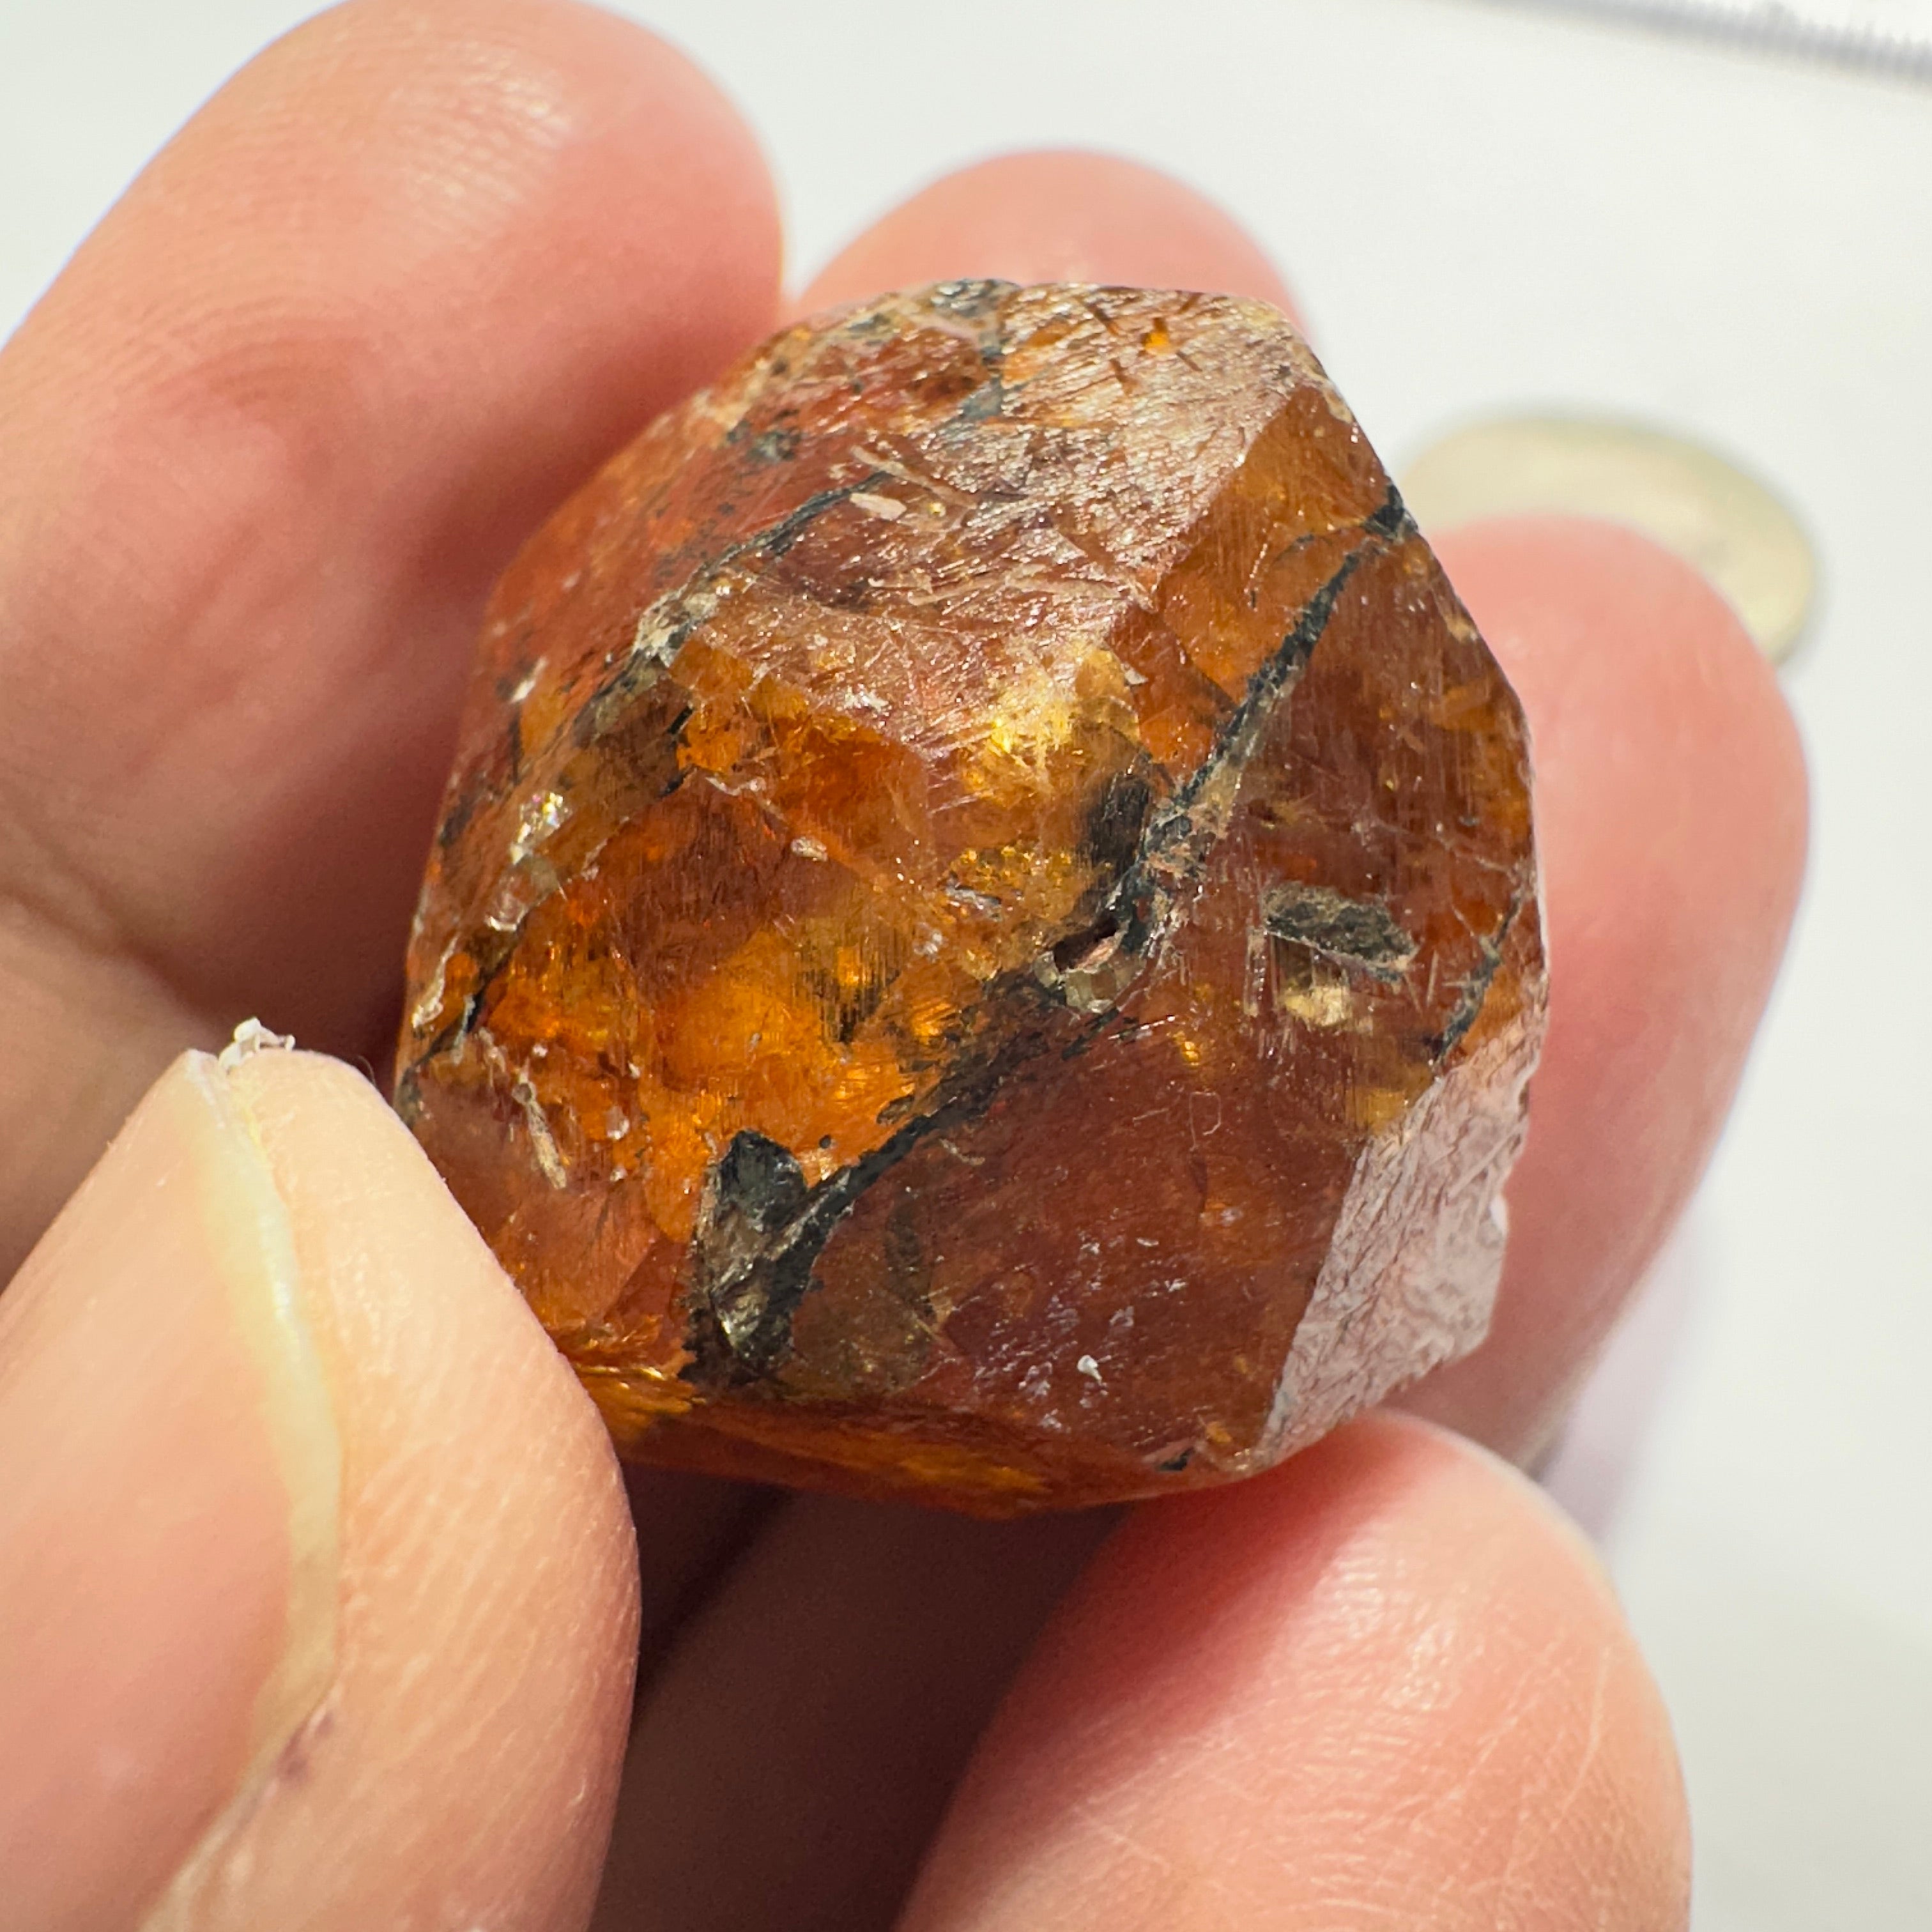 144.00ct / 28.80gm Spessartite Garnet Crystal, Loliondo, Tanzania. 25 x 20 x 23 mm. Facetable portions, Untreated Unheated